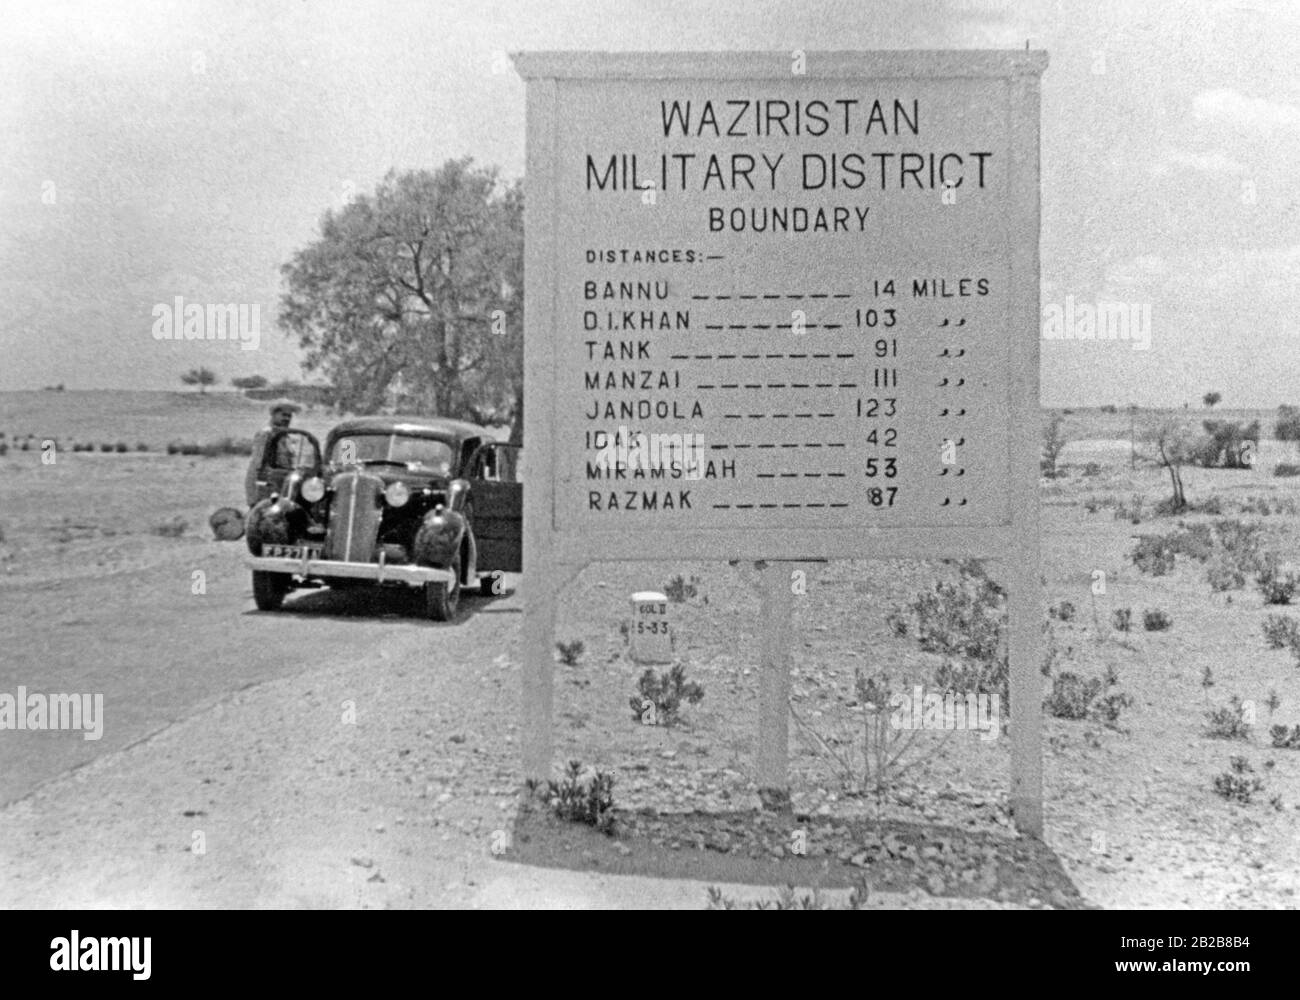 Road sign in the border region of the British colony in the northwest, in today's Pakistan. The region was the scene of uprisings against British domination in the 1930s. Waziristan was not under the control of the British civil administration, but of the military authorities. Stock Photo